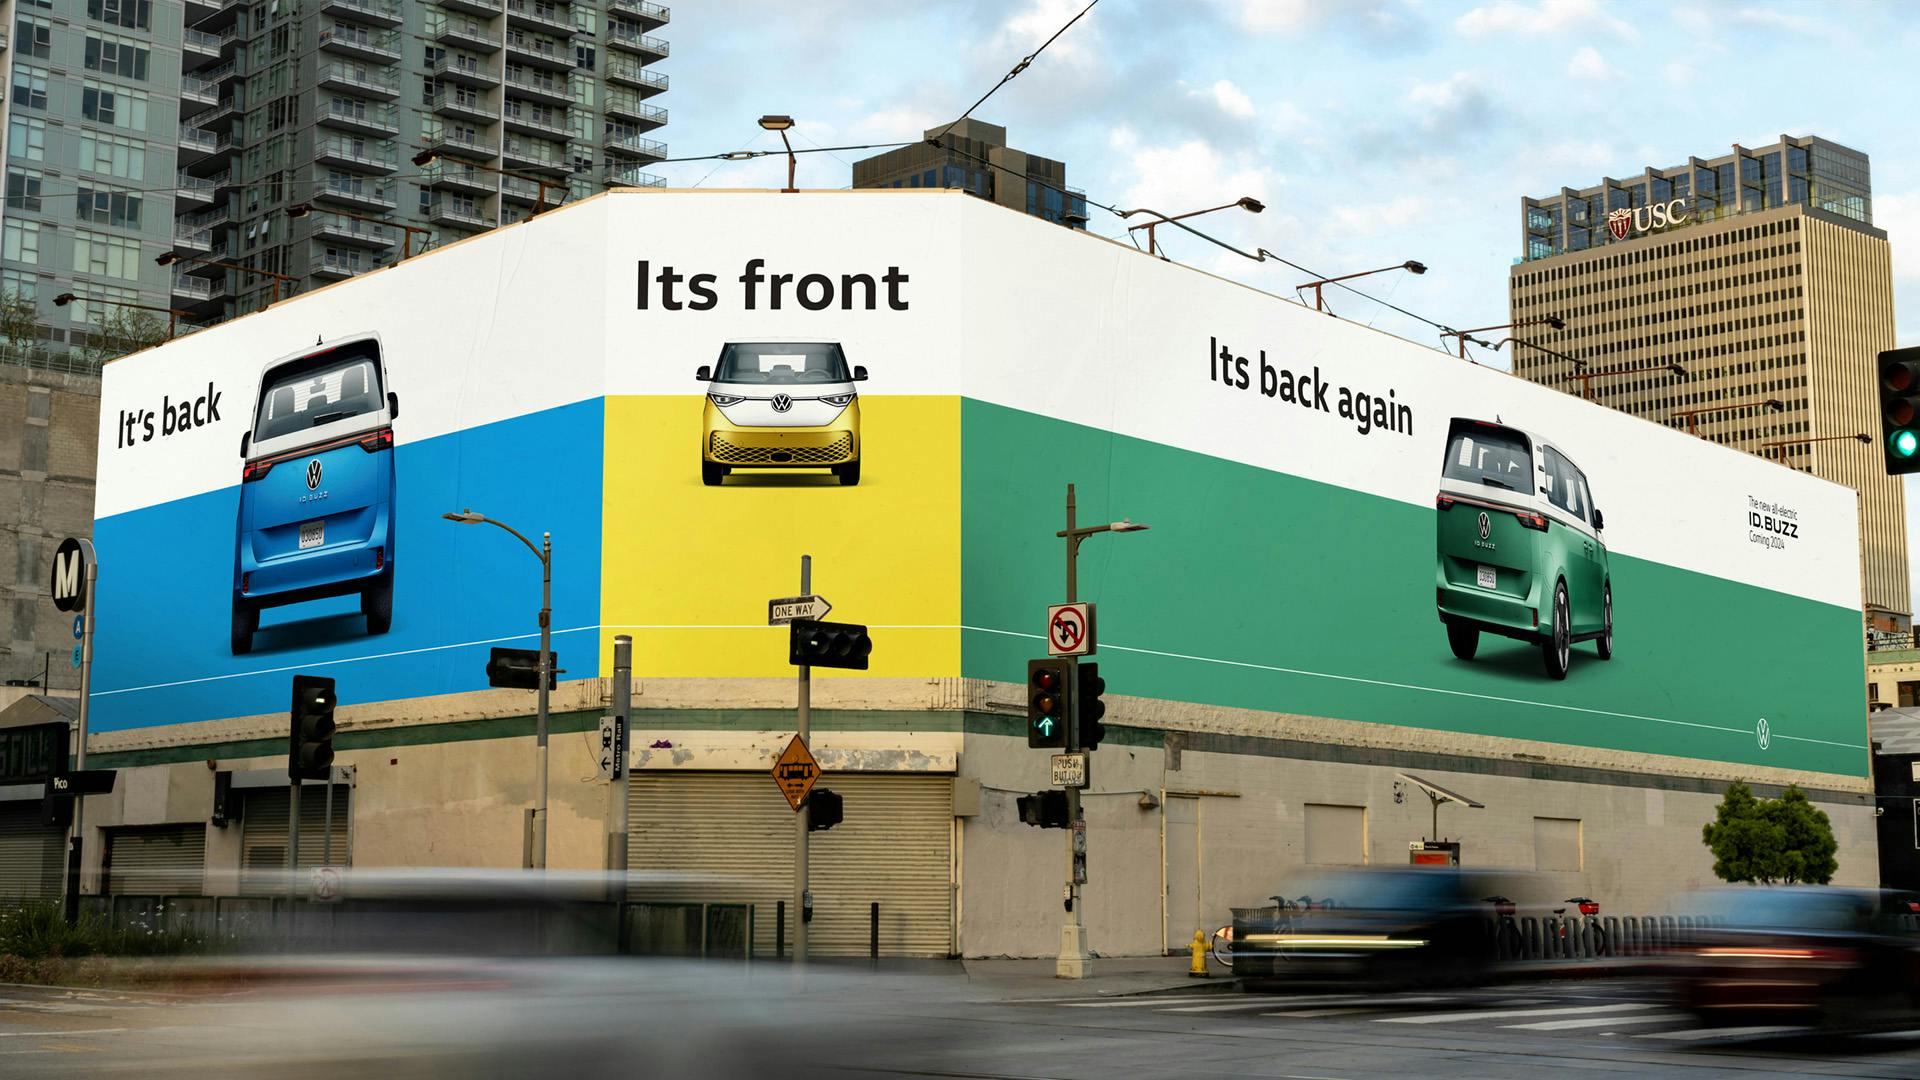 Photo shows a wraparound billboard at NYC port authority for VW's ID Buzz bus, with the lines 'It's back, its front, it's back again' above images of three VW buses in blue, yellow and green